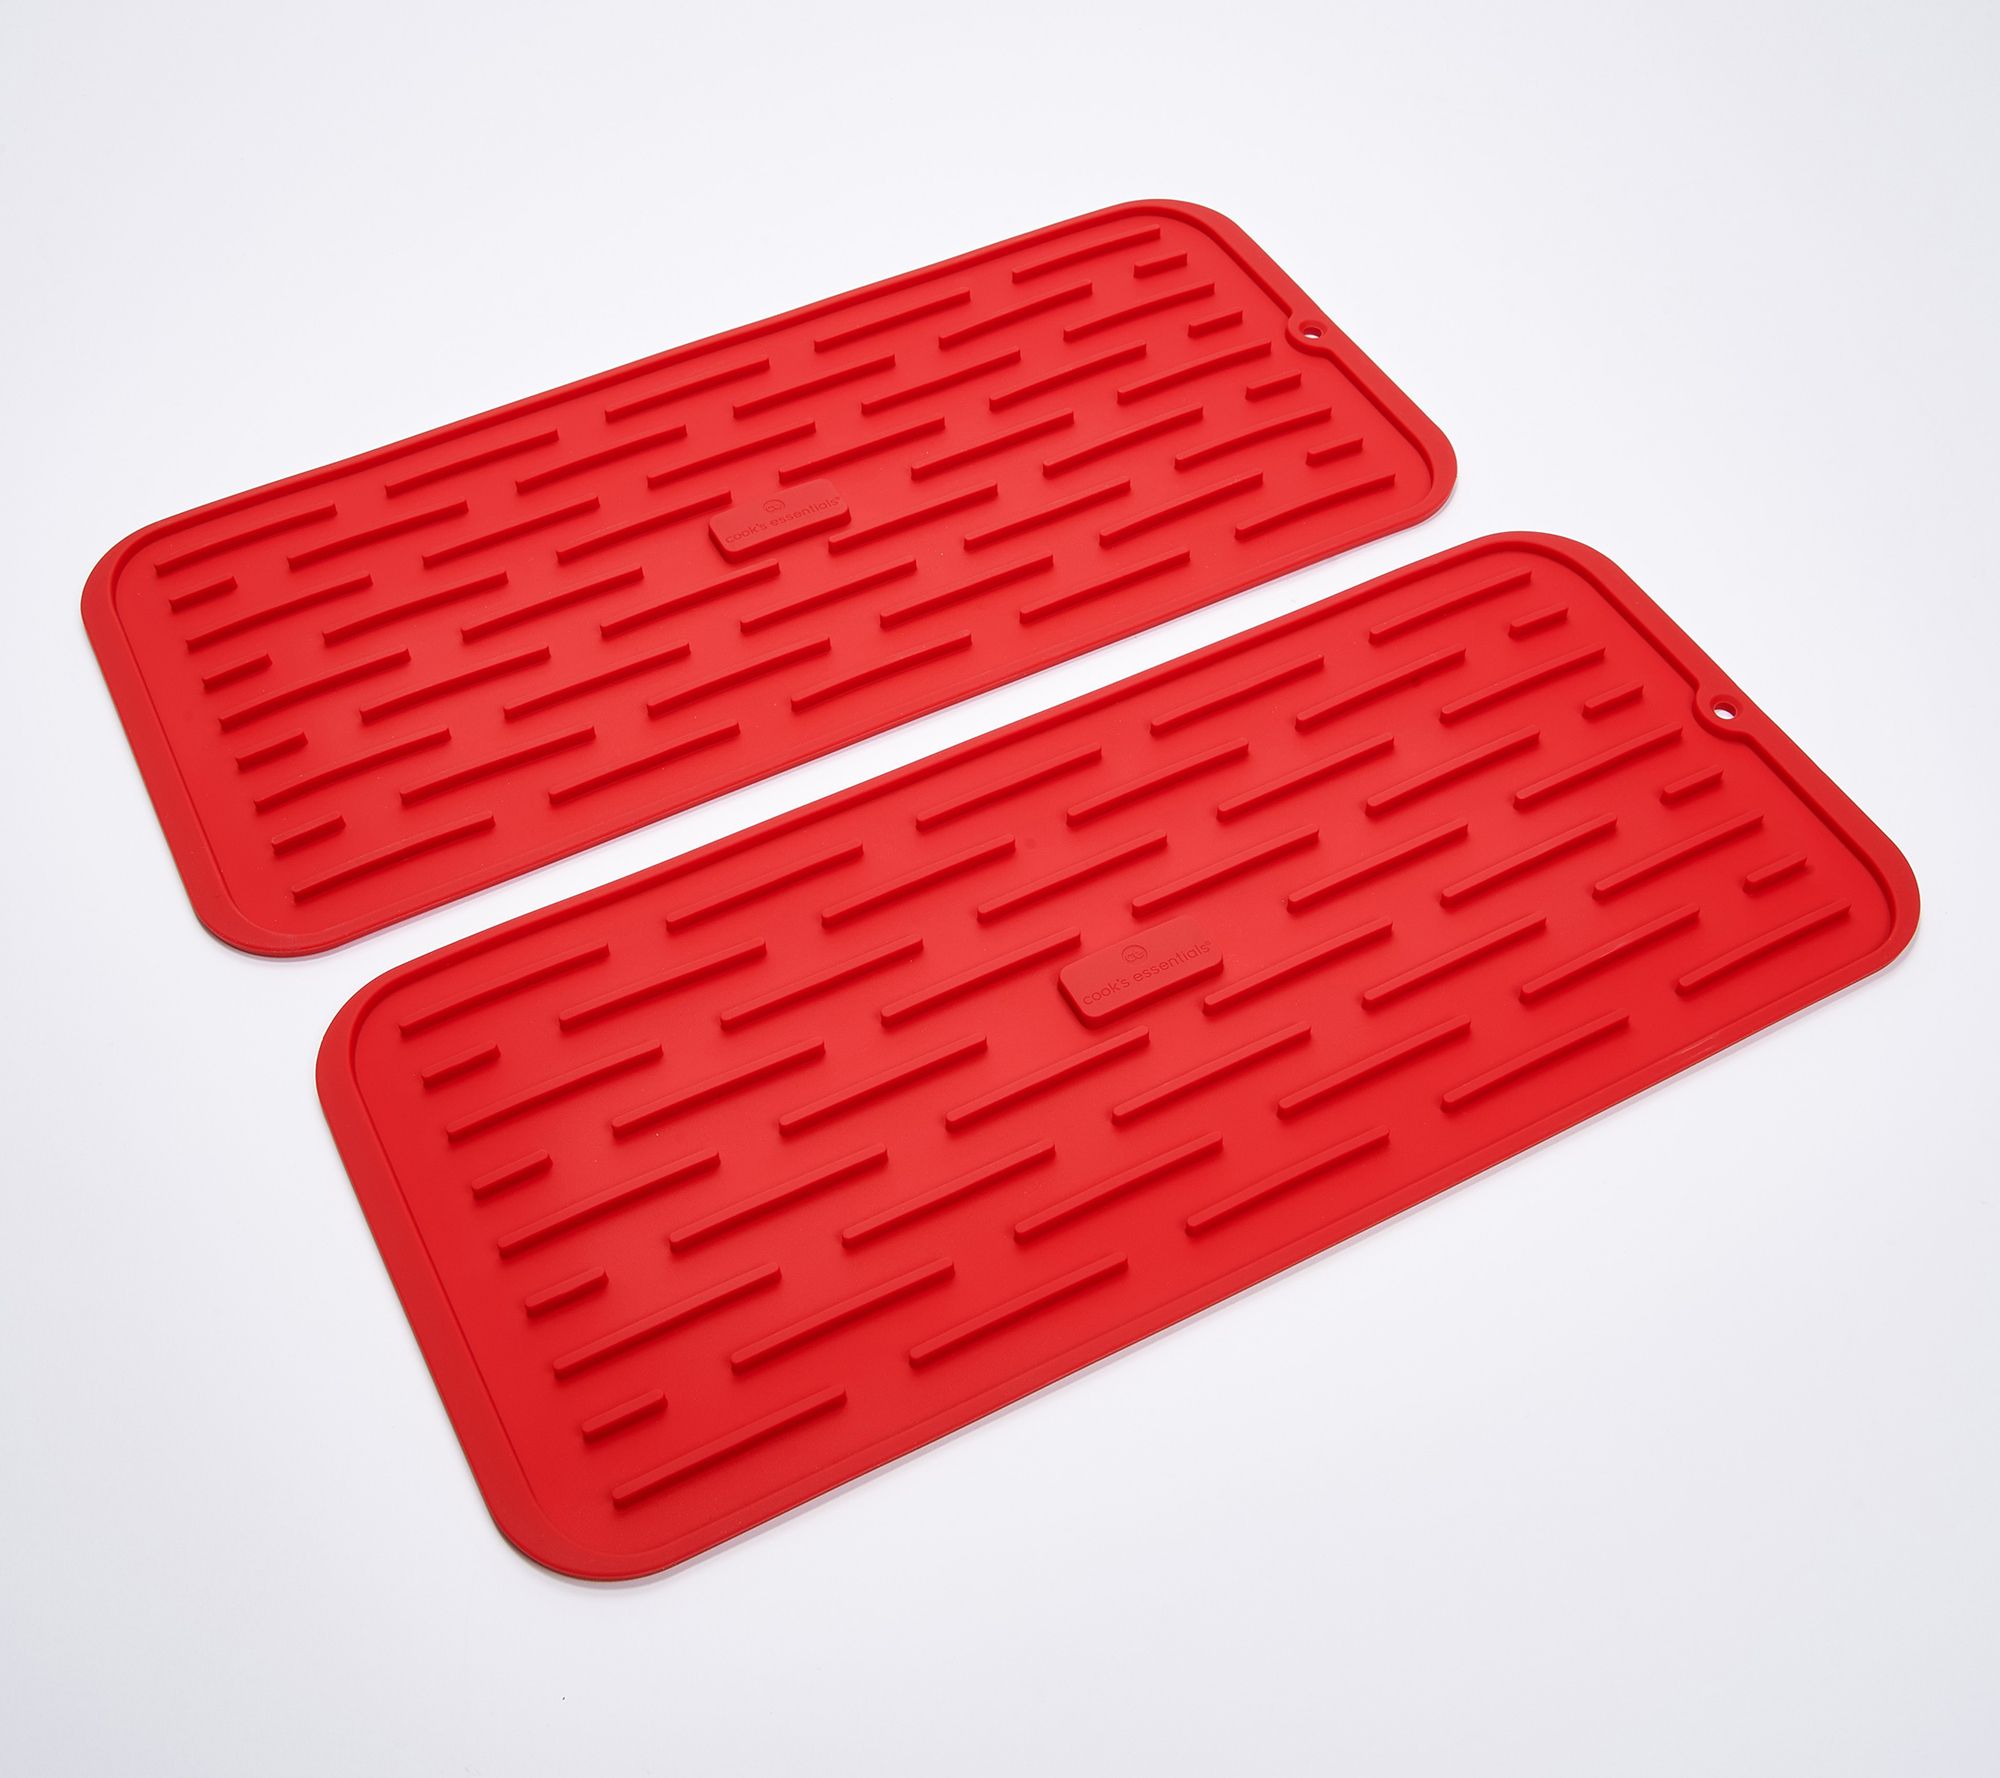 Rubbermaid Sink Mat, Small, Red 